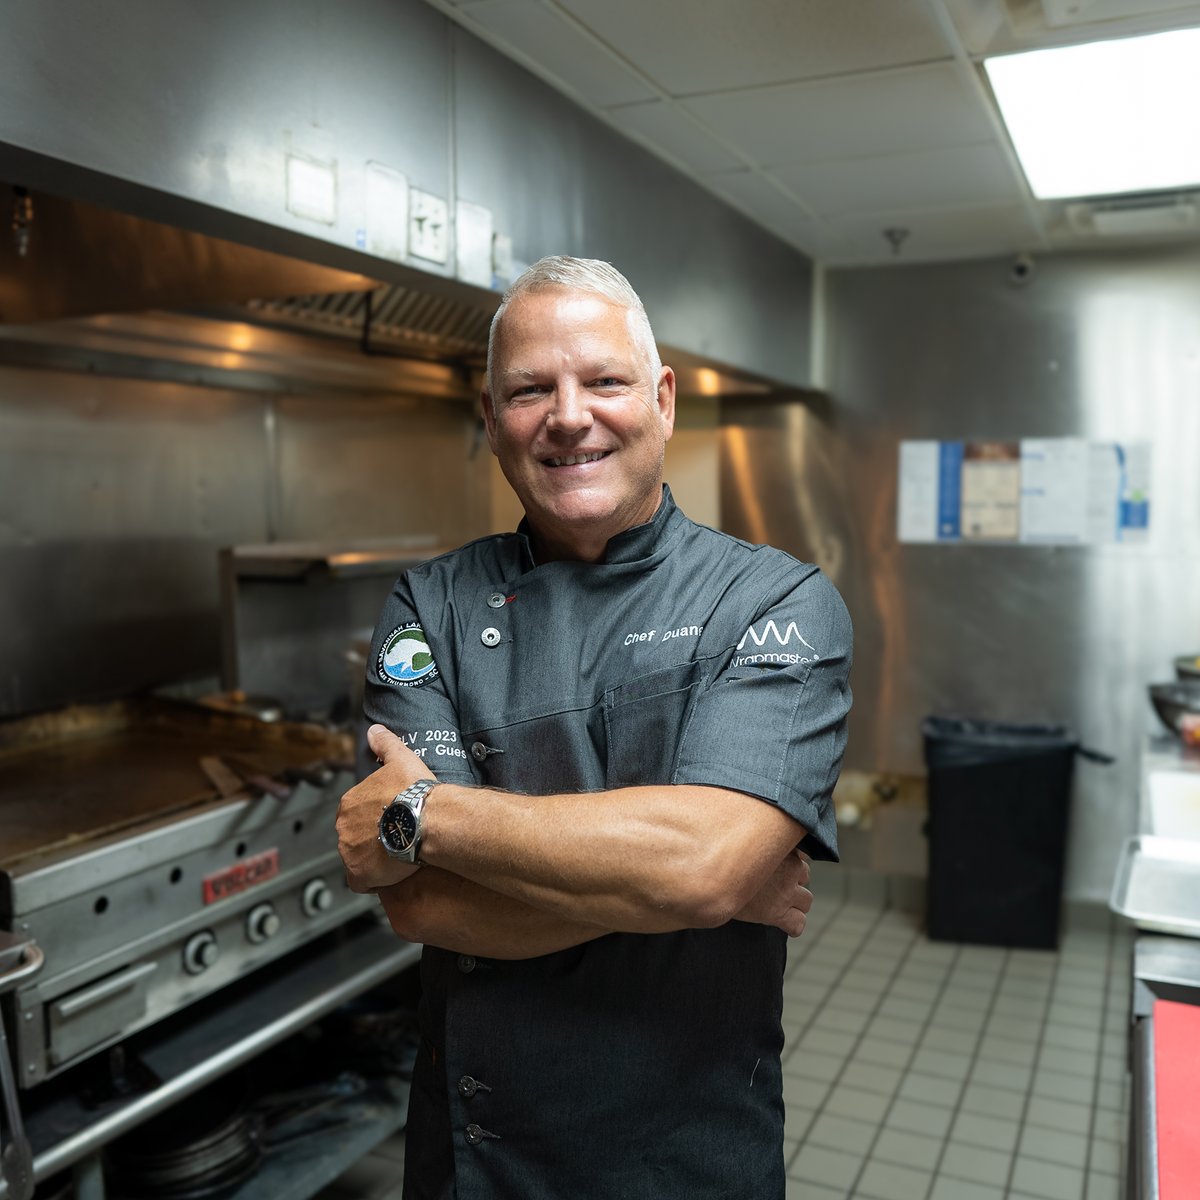 “We have very clean kitchens. I love Wrapmaster® for that reason.” -Chef Duane Keller, Food and Beverage Director at Savannah Lakes Village Discover how Wrapmaster supports hospitality operations: wrapmaster.global/en/case-studie… #Foodservice